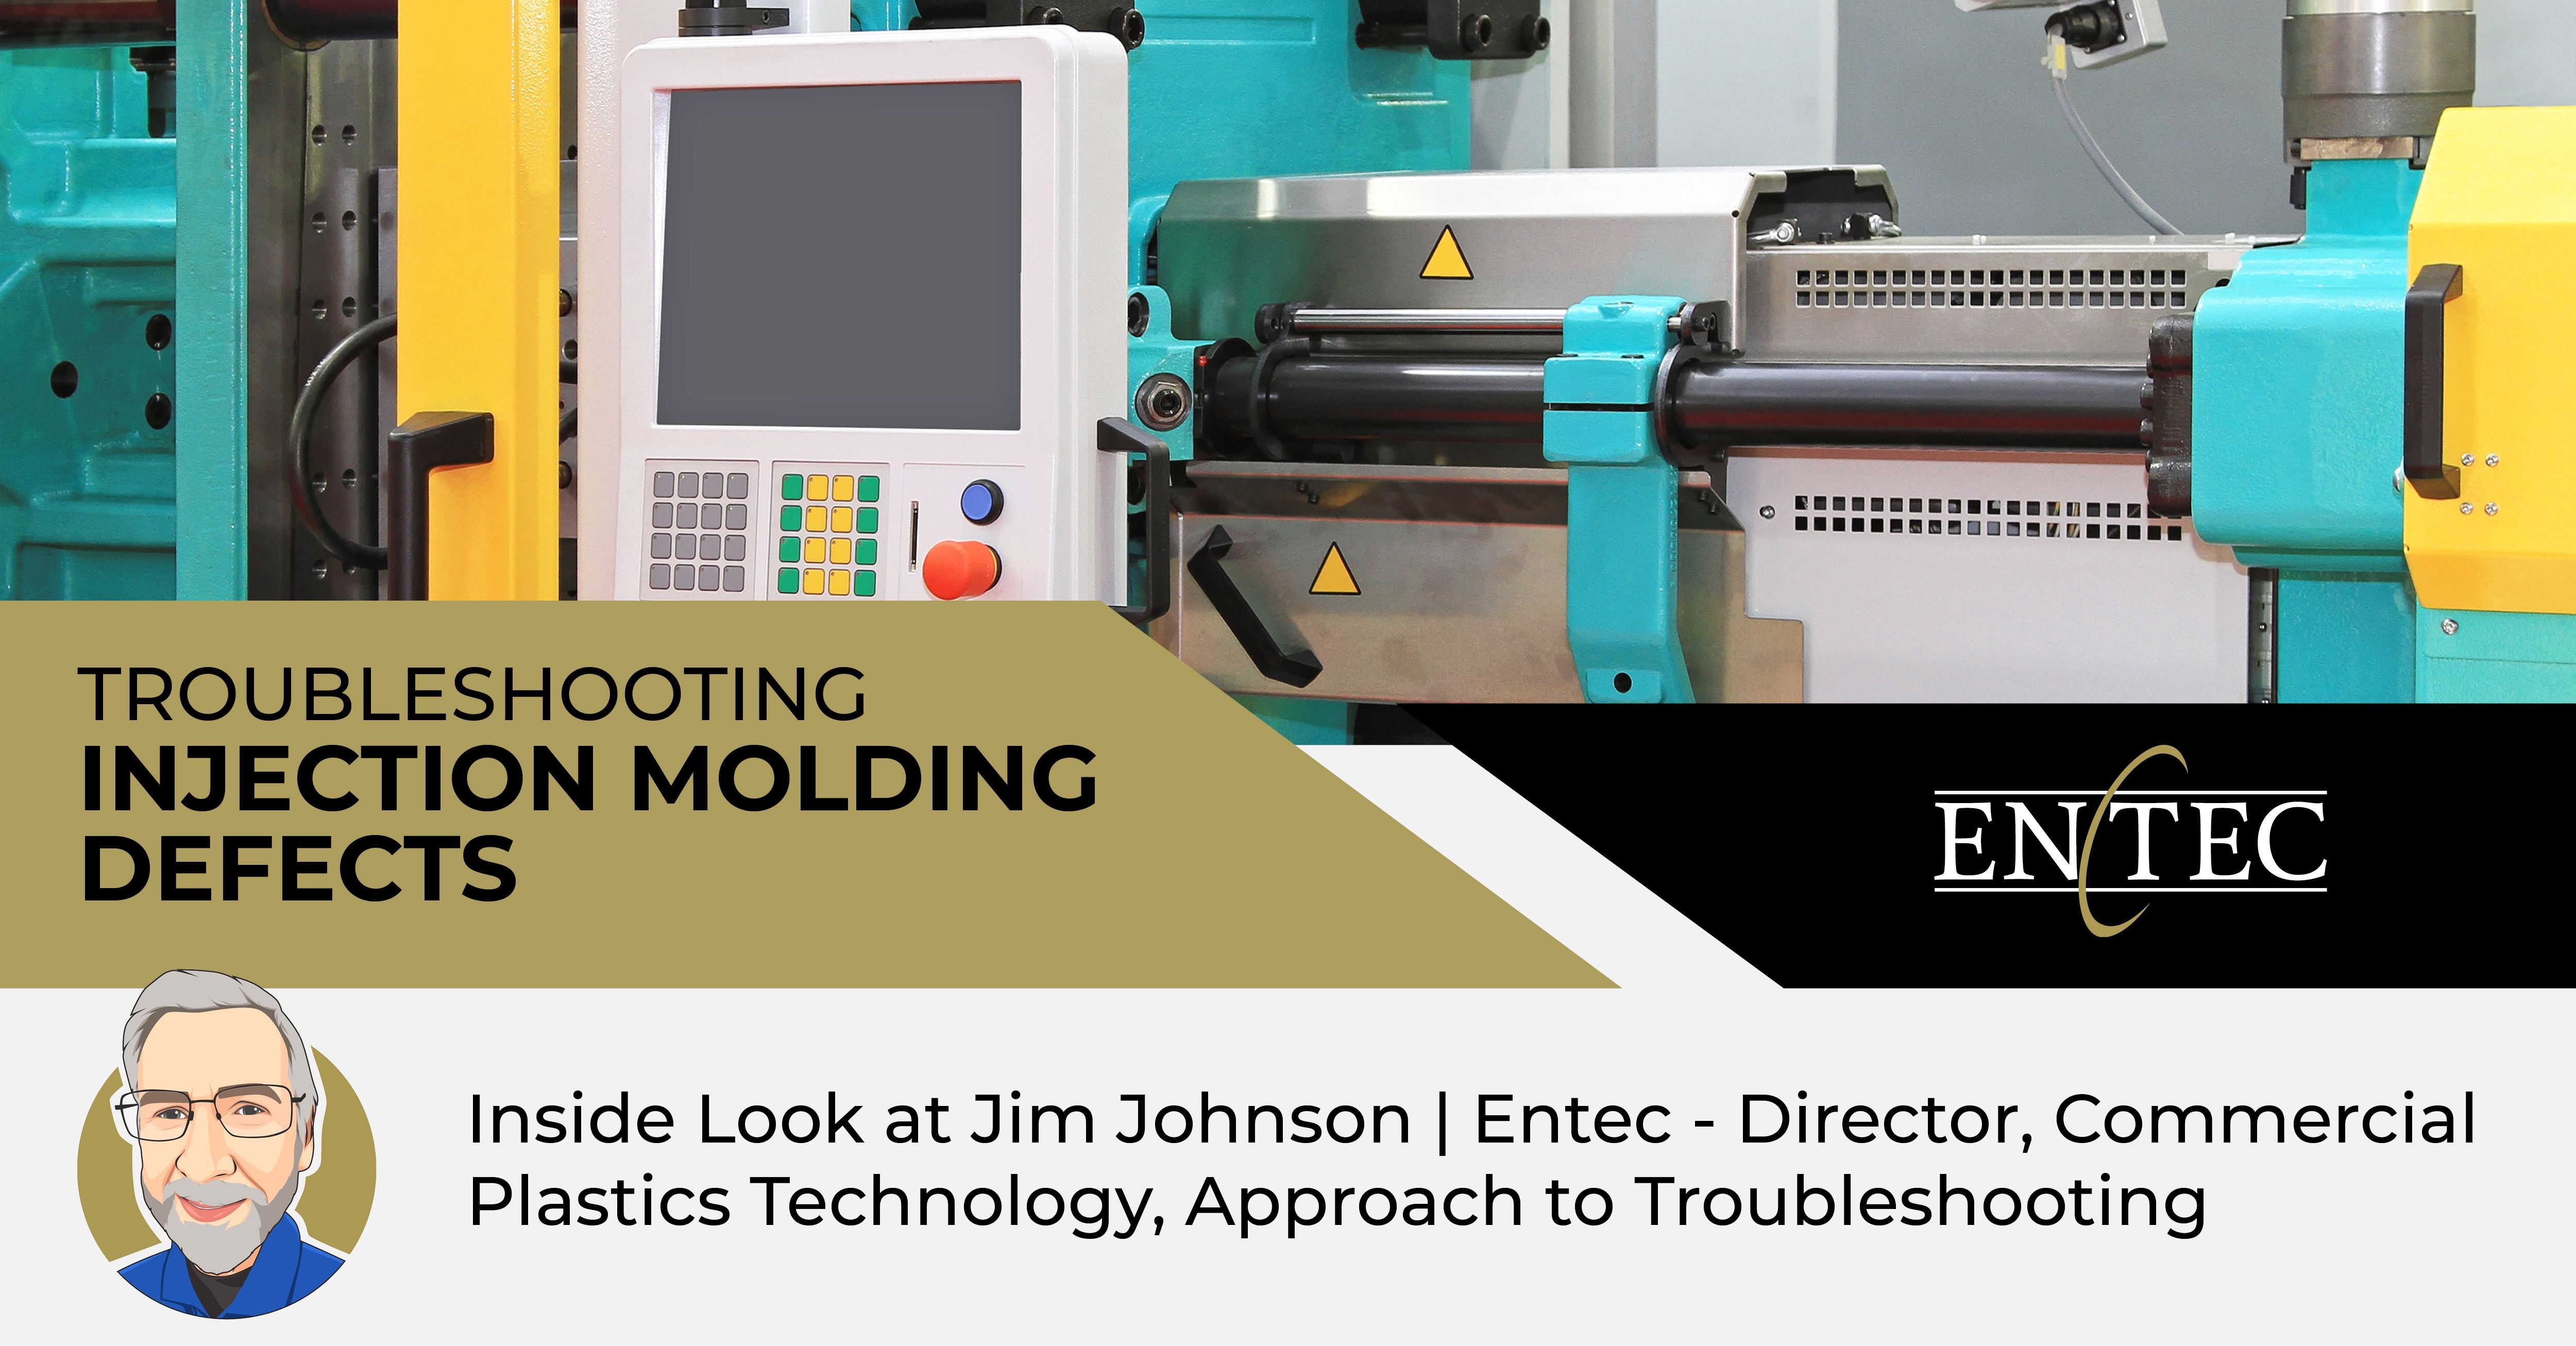 Troubleshooting Injection Molding Defects Social Media Post